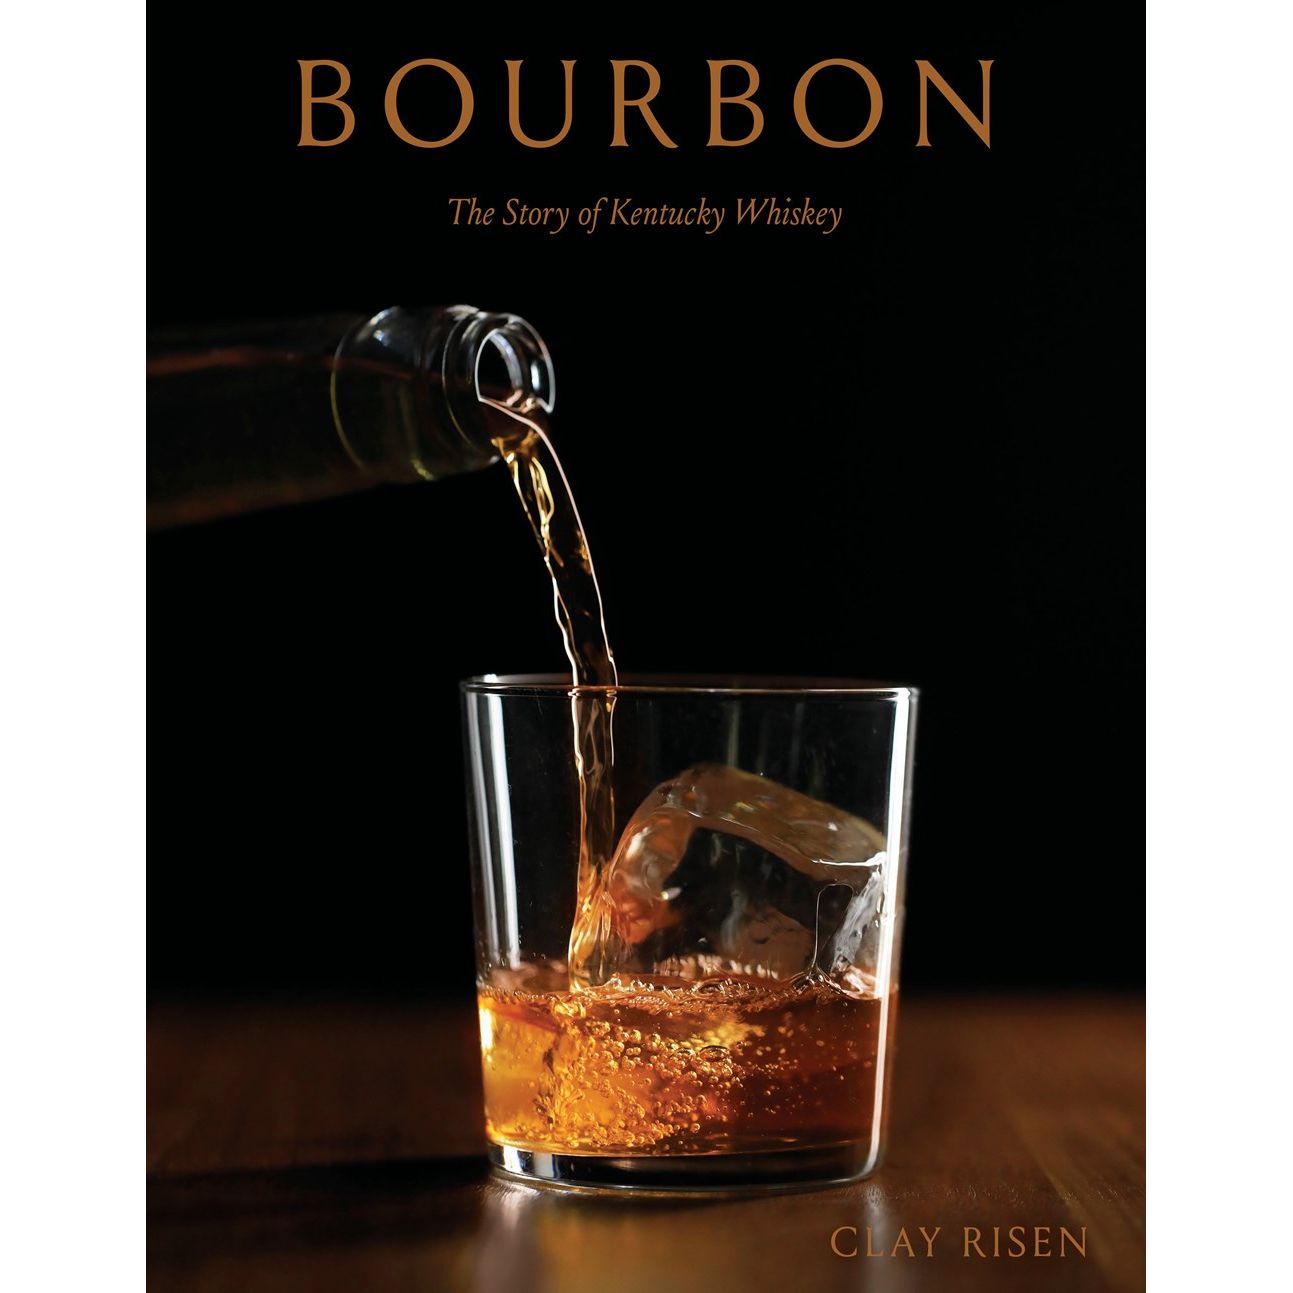 Bourbon: The Story of Kentucky Whiskey (Clay Risen)